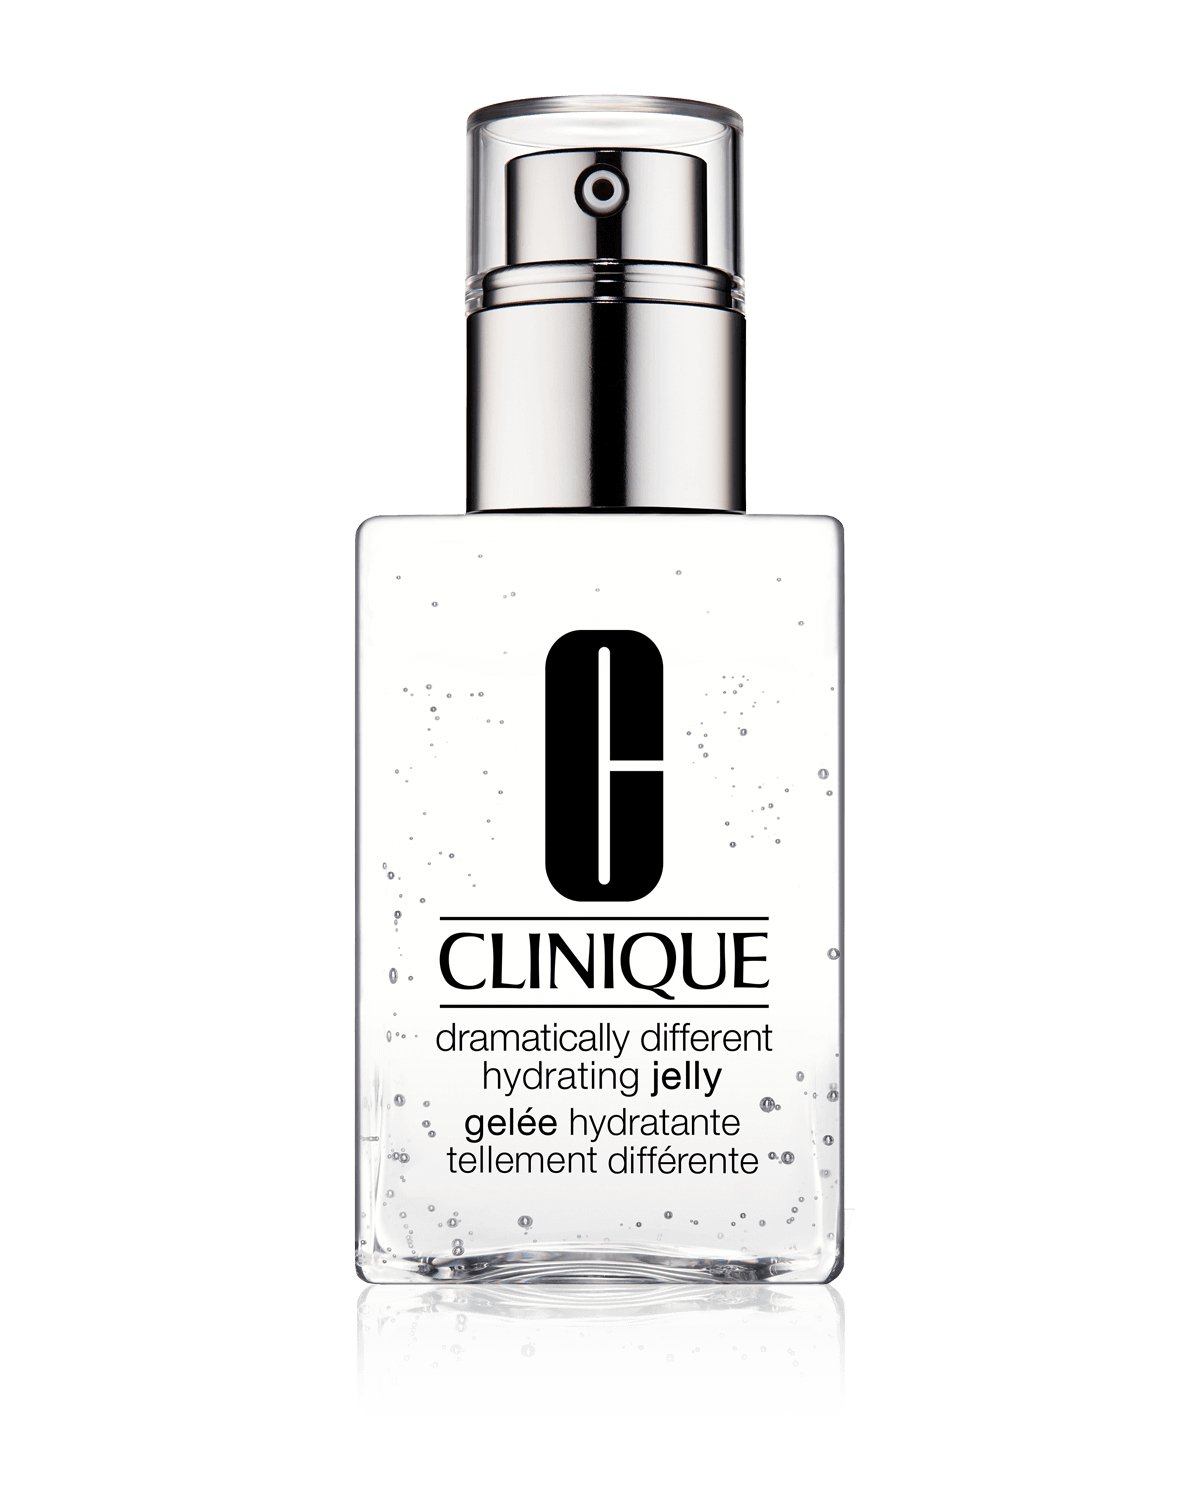 Clinique Dramatically Different Hydrating Jelly 200Ml - AllurebeautypkClinique Dramatically Different Hydrating Jelly 200Ml